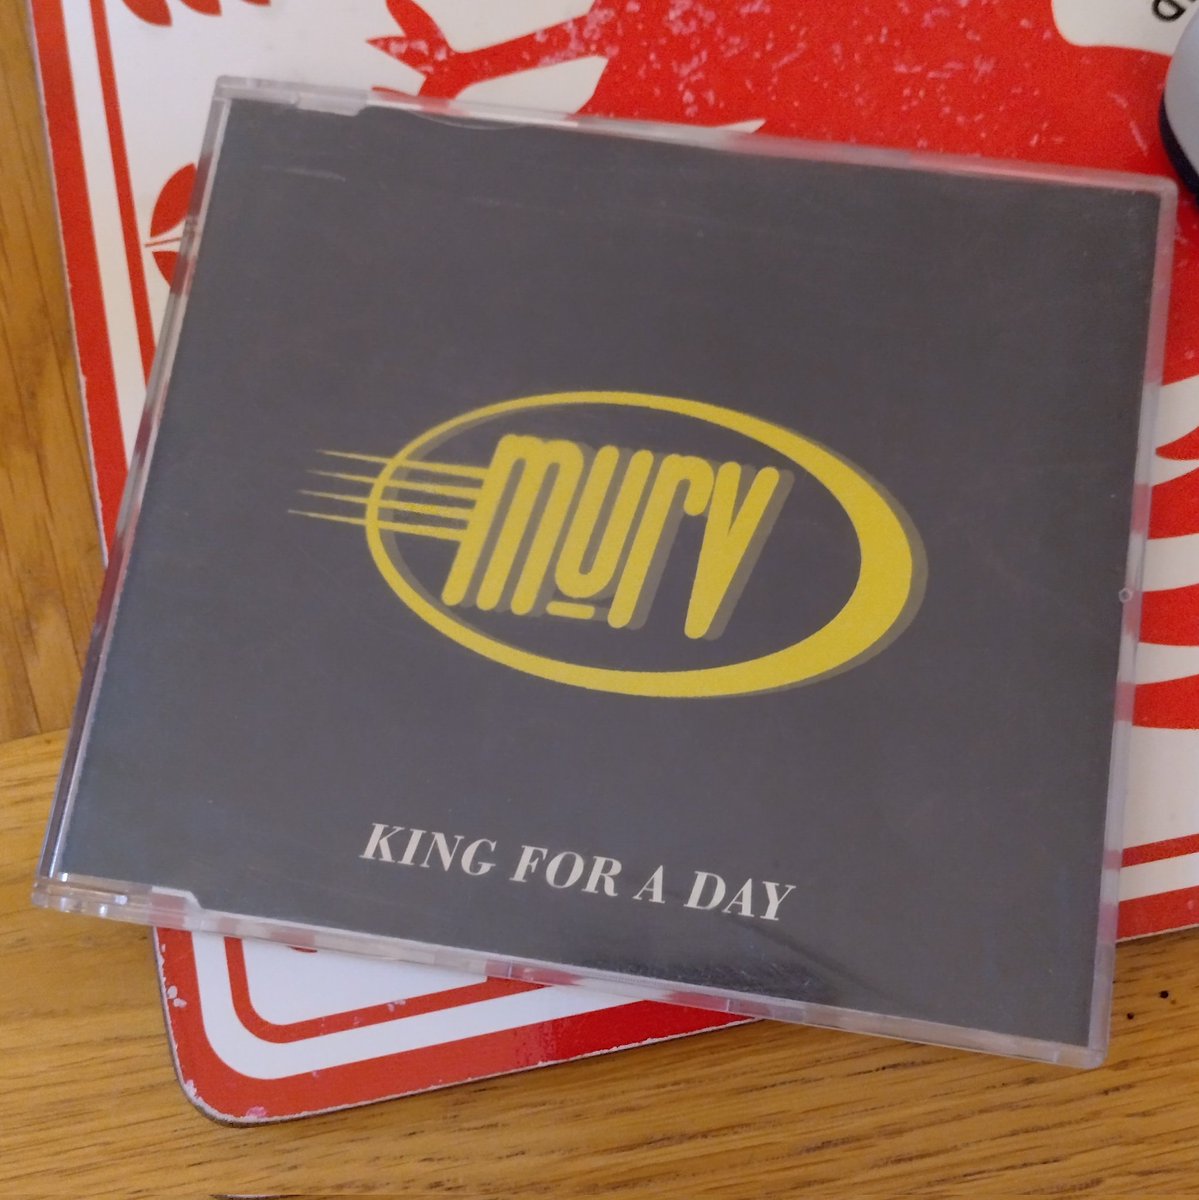 There are blasts from the past, and then there's this!
#Murv #KingForADay